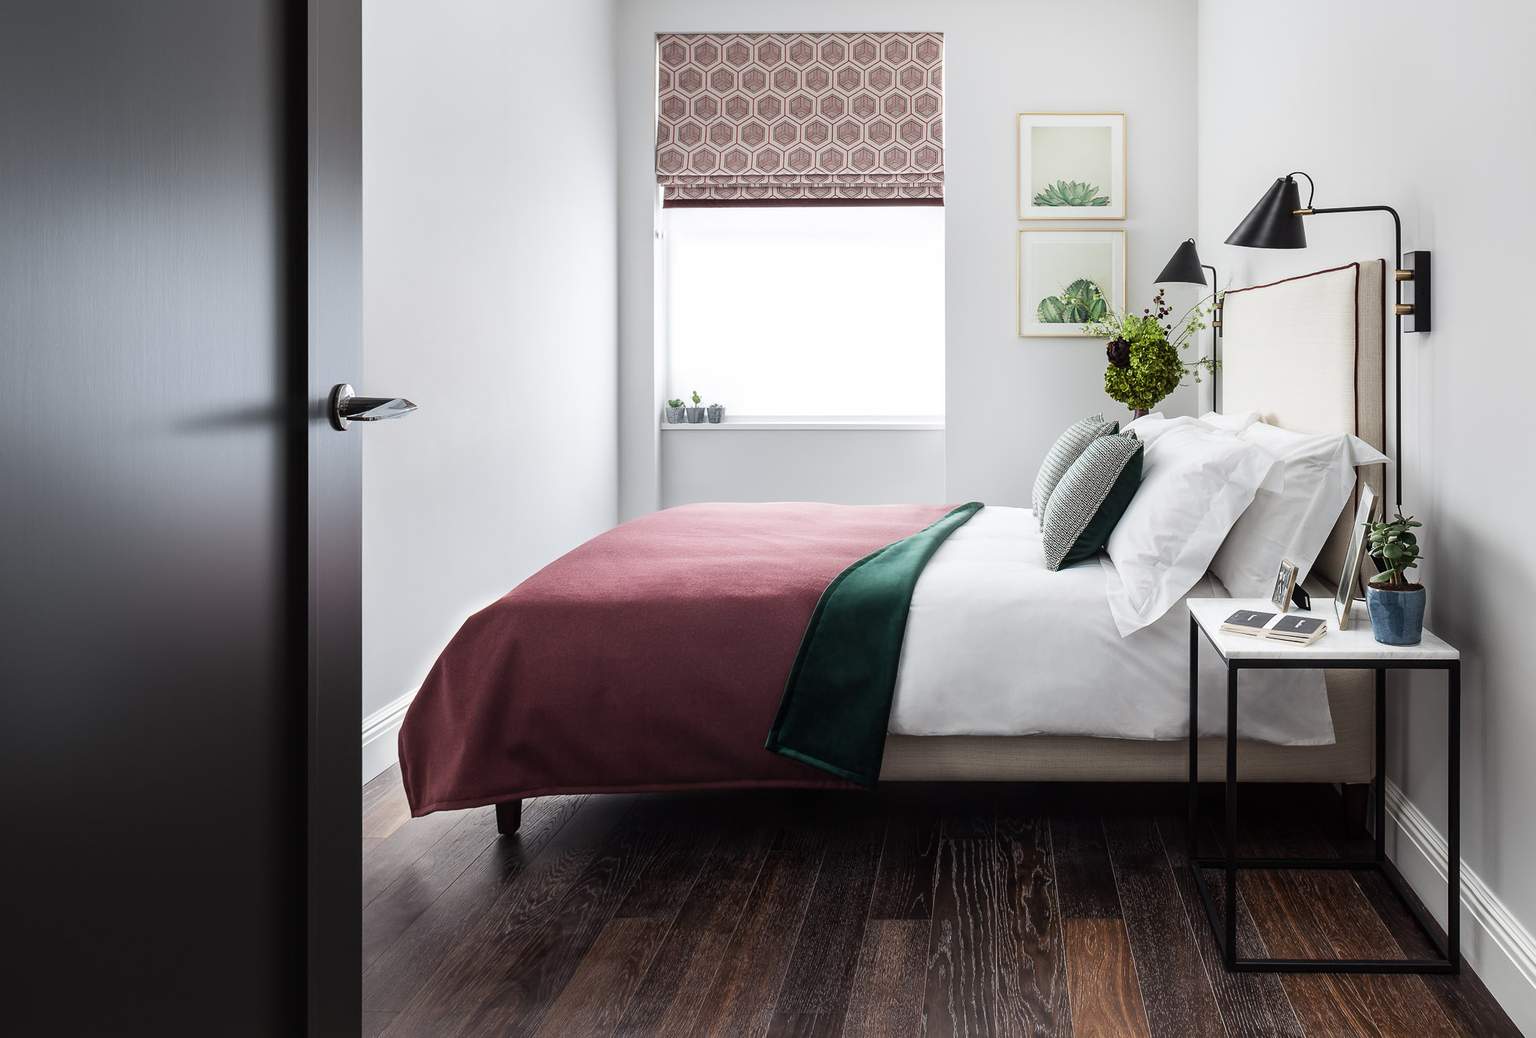 Bedroom Red with hexagonal blind, cactus prints, black metal wall lights, marble bedside tables from Gillmore space